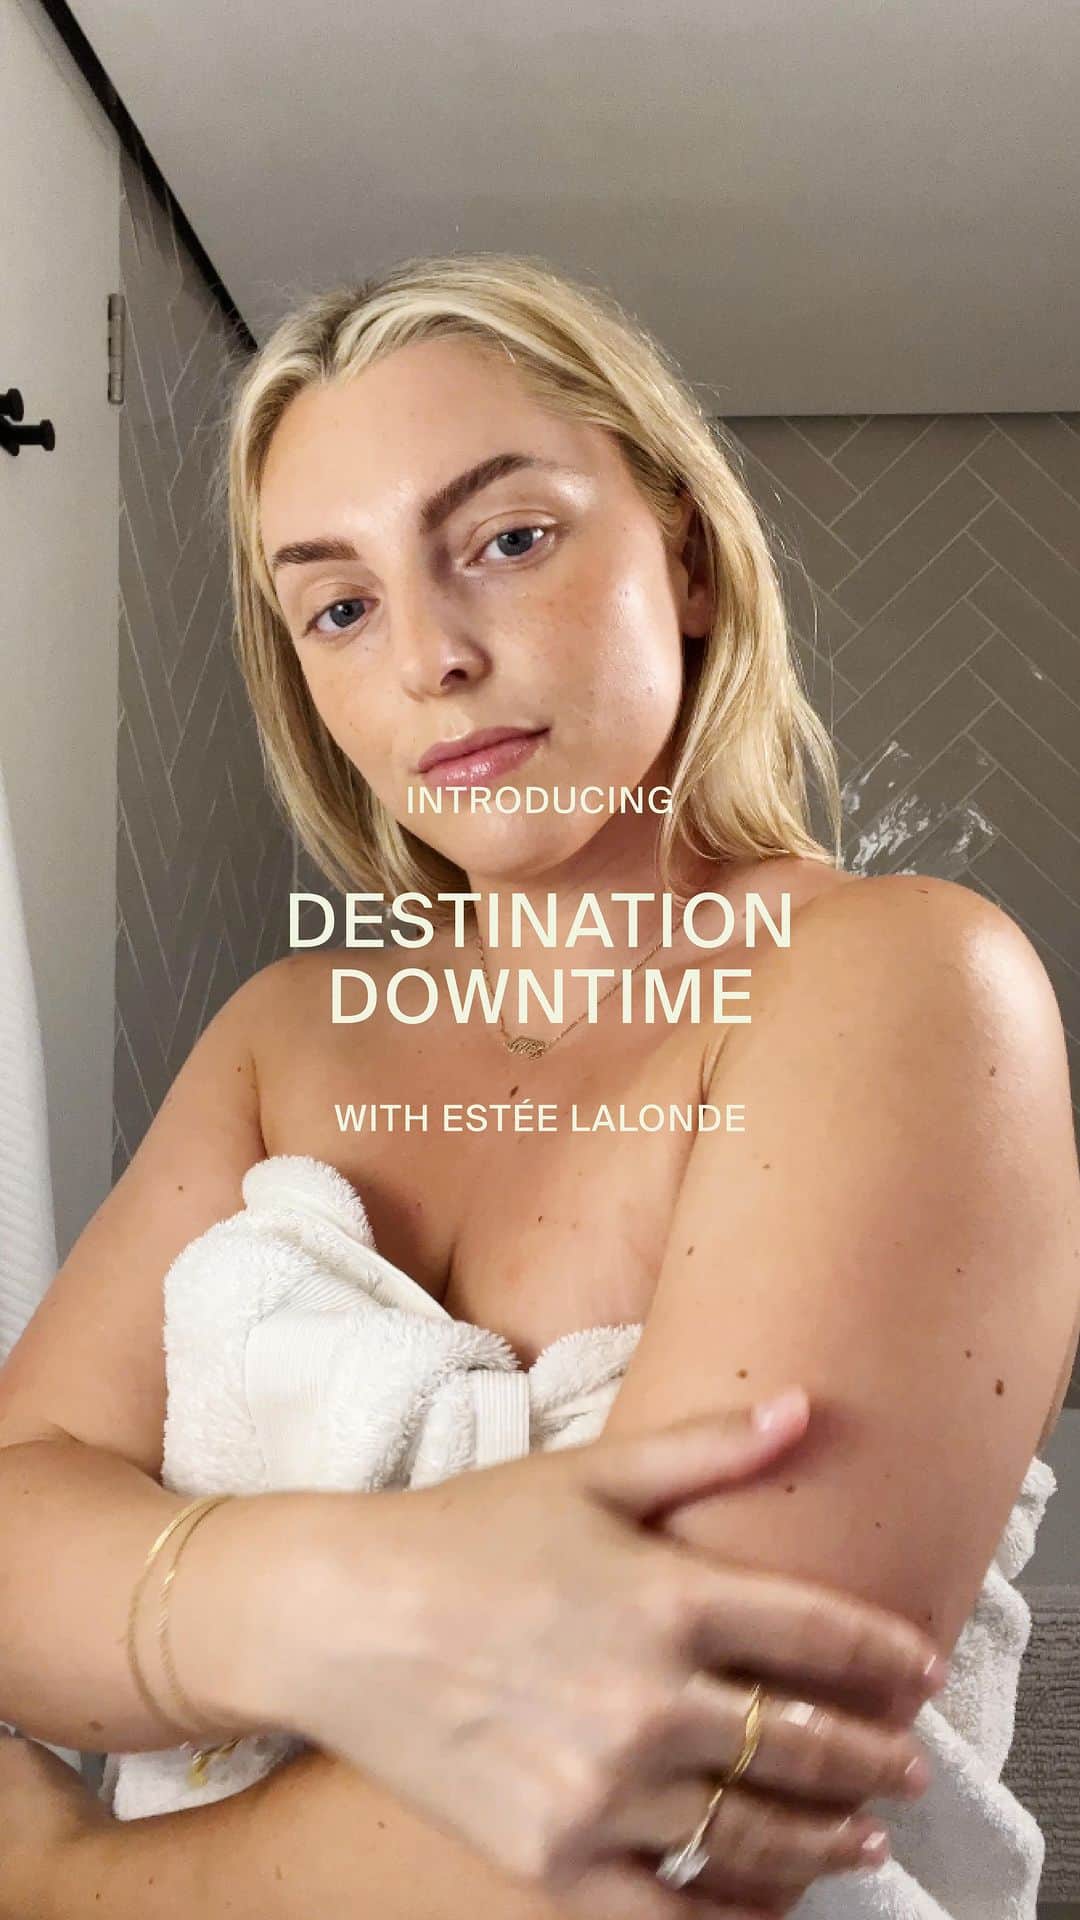 Estée Lalondeのインスタグラム：「For anyone who’s *really* in need of a nap: through September and October, we’re sharing why MIRROR WATER is your destination for everything downtime.   Grab some SMOOTH Body Oil, and moisturise with us as @esteeelalonde talks through what’s in store:  〰️ Articles with wellness experts 〰️ IG takeovers 〰️ Community events 〰️ Guides to our four hero bodycare products  AKA, a month-long how-to guide to downtime (because we all need it).  Follow us on socials to keep up 🤎  #MIRRORWATER」